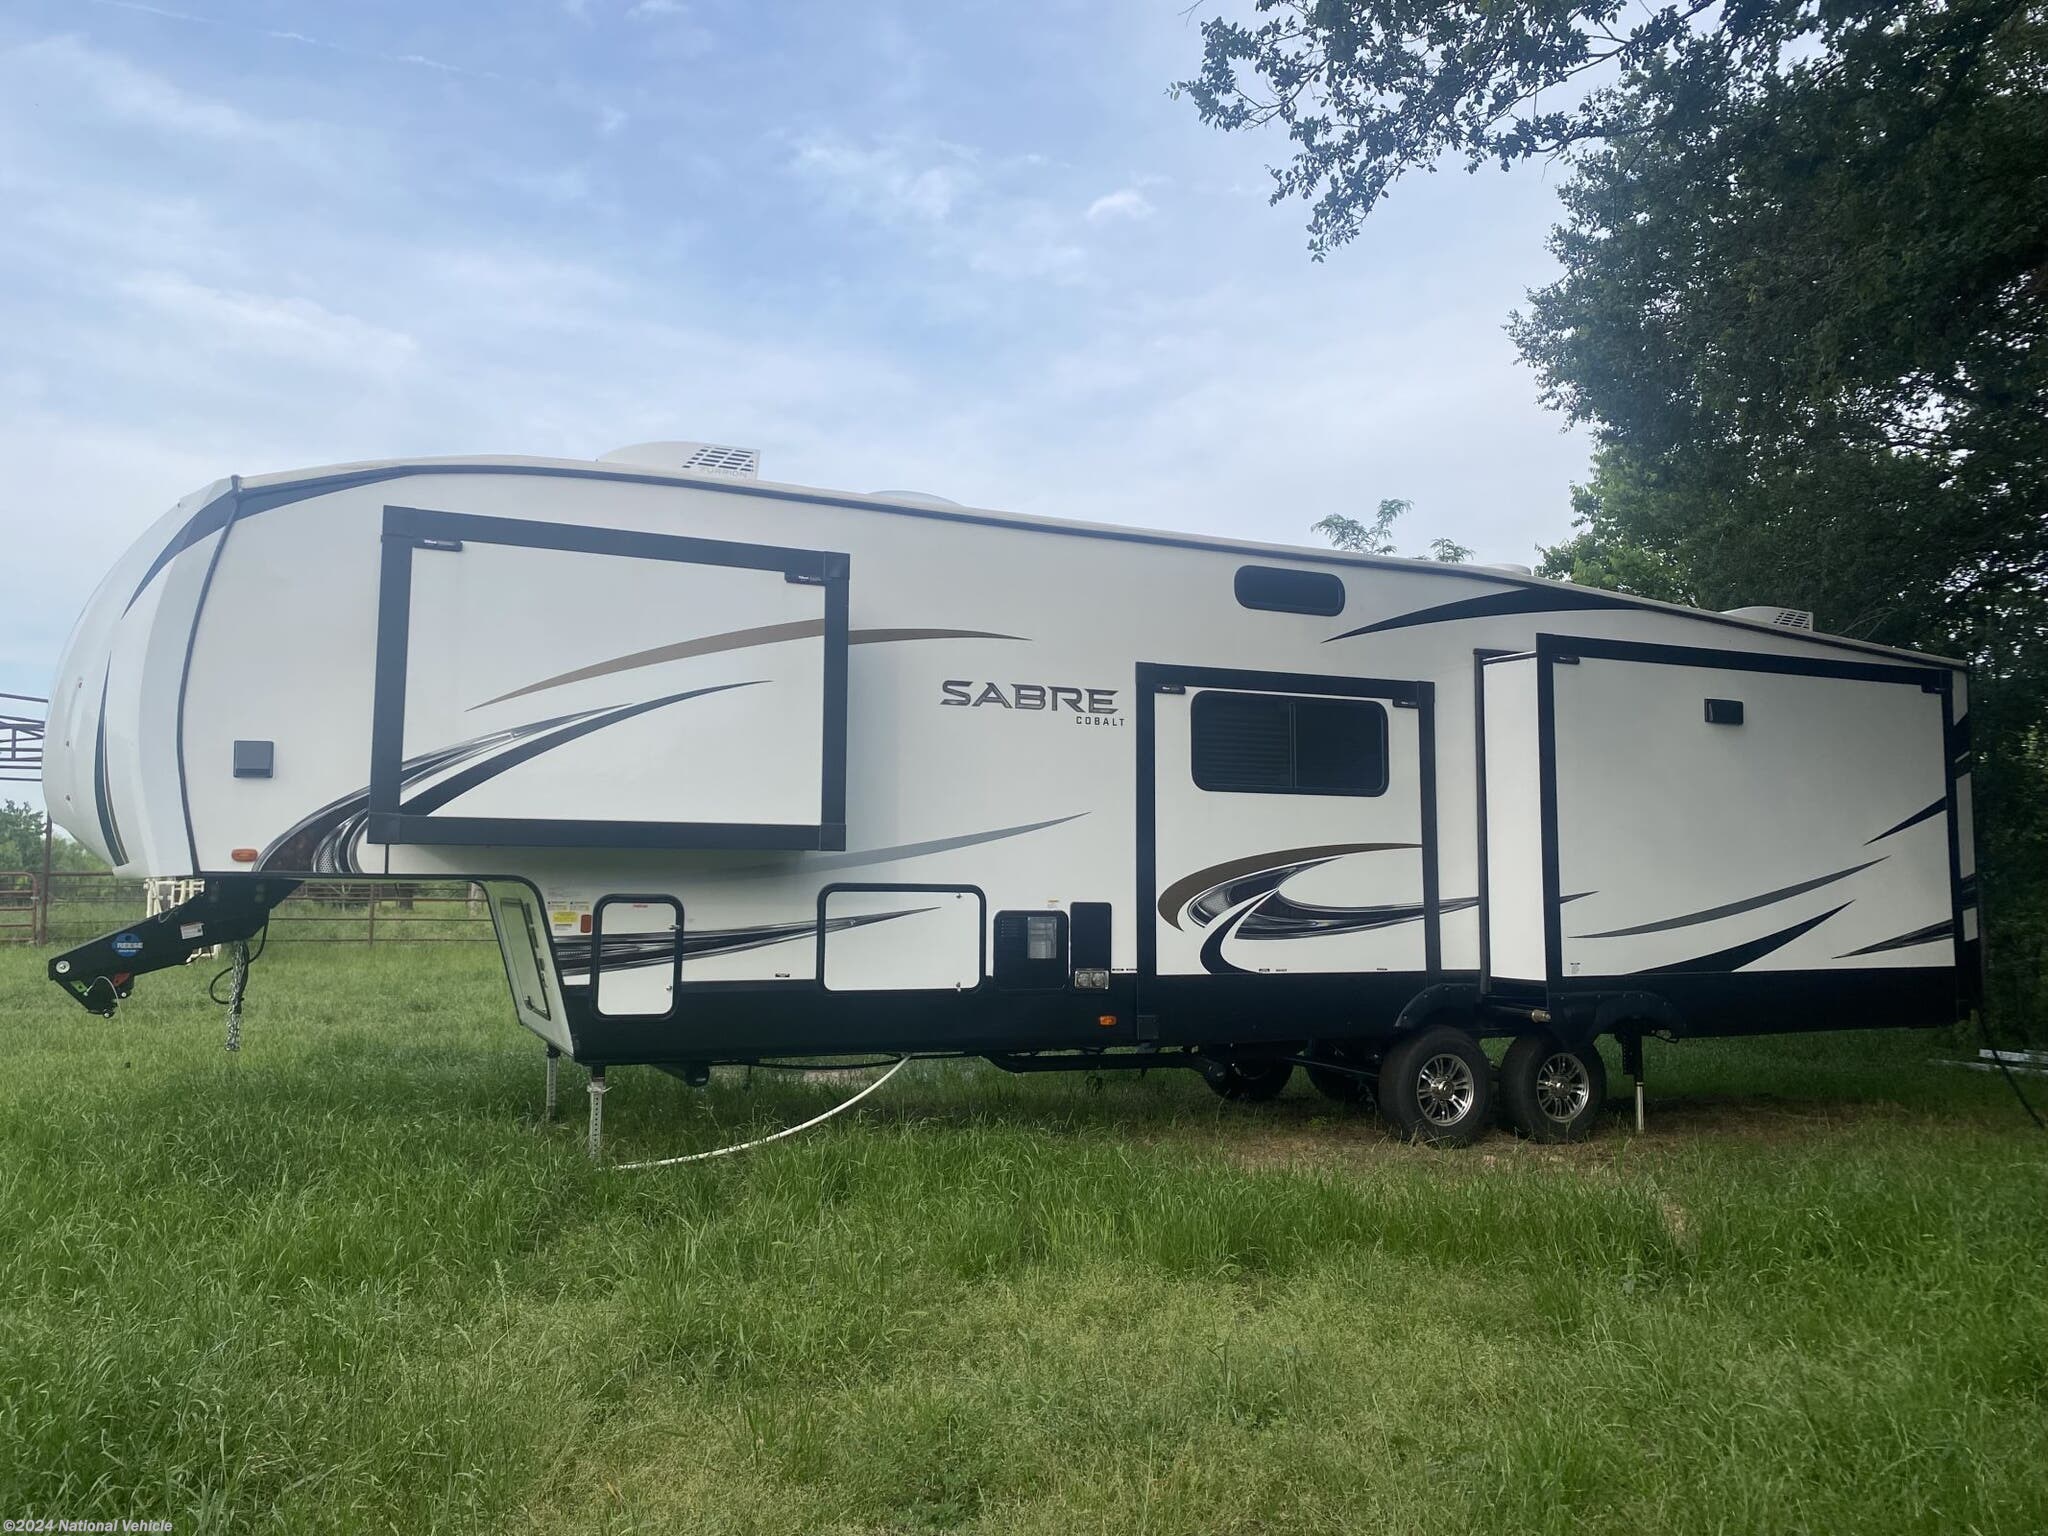 2022 Forest River Sabre 36BHQ RV for Sale in Corsicana, TX 75110 ...